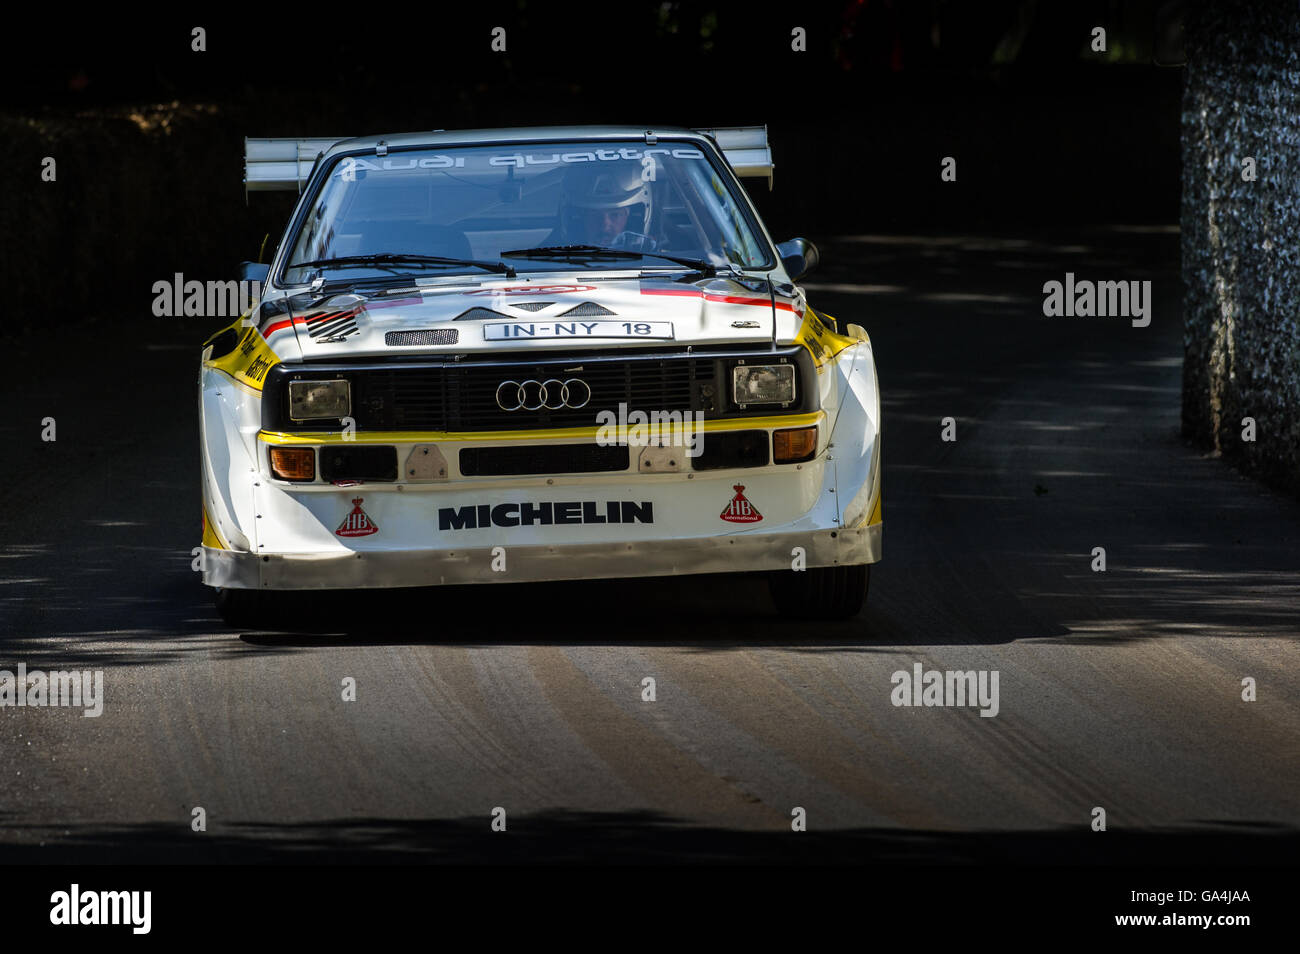 David Llewellyn drives the Audi Sport quattro S1 E2 up the hill at the Goodwood Festival of Speed 2016 Stock Photo